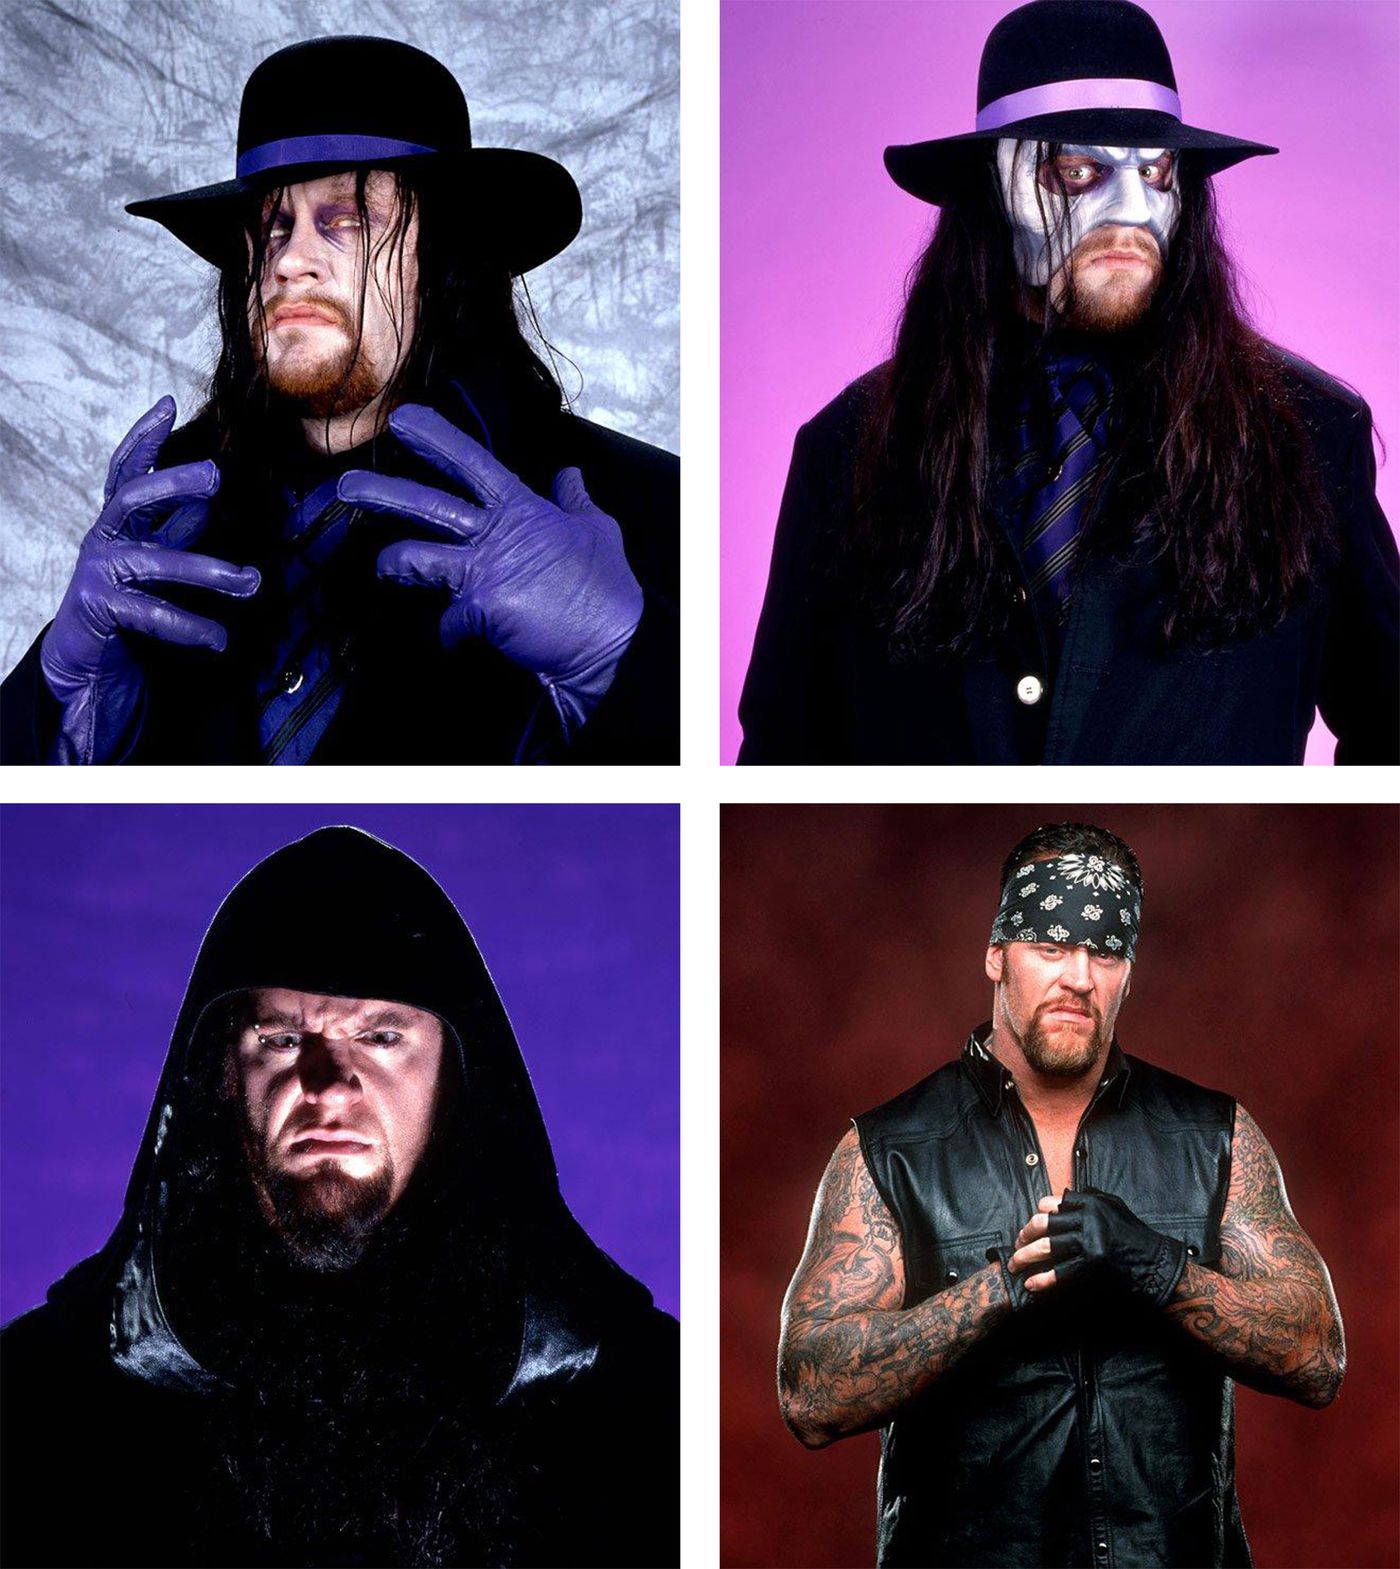 Dead Man Rising: The Making of the Undertaker.